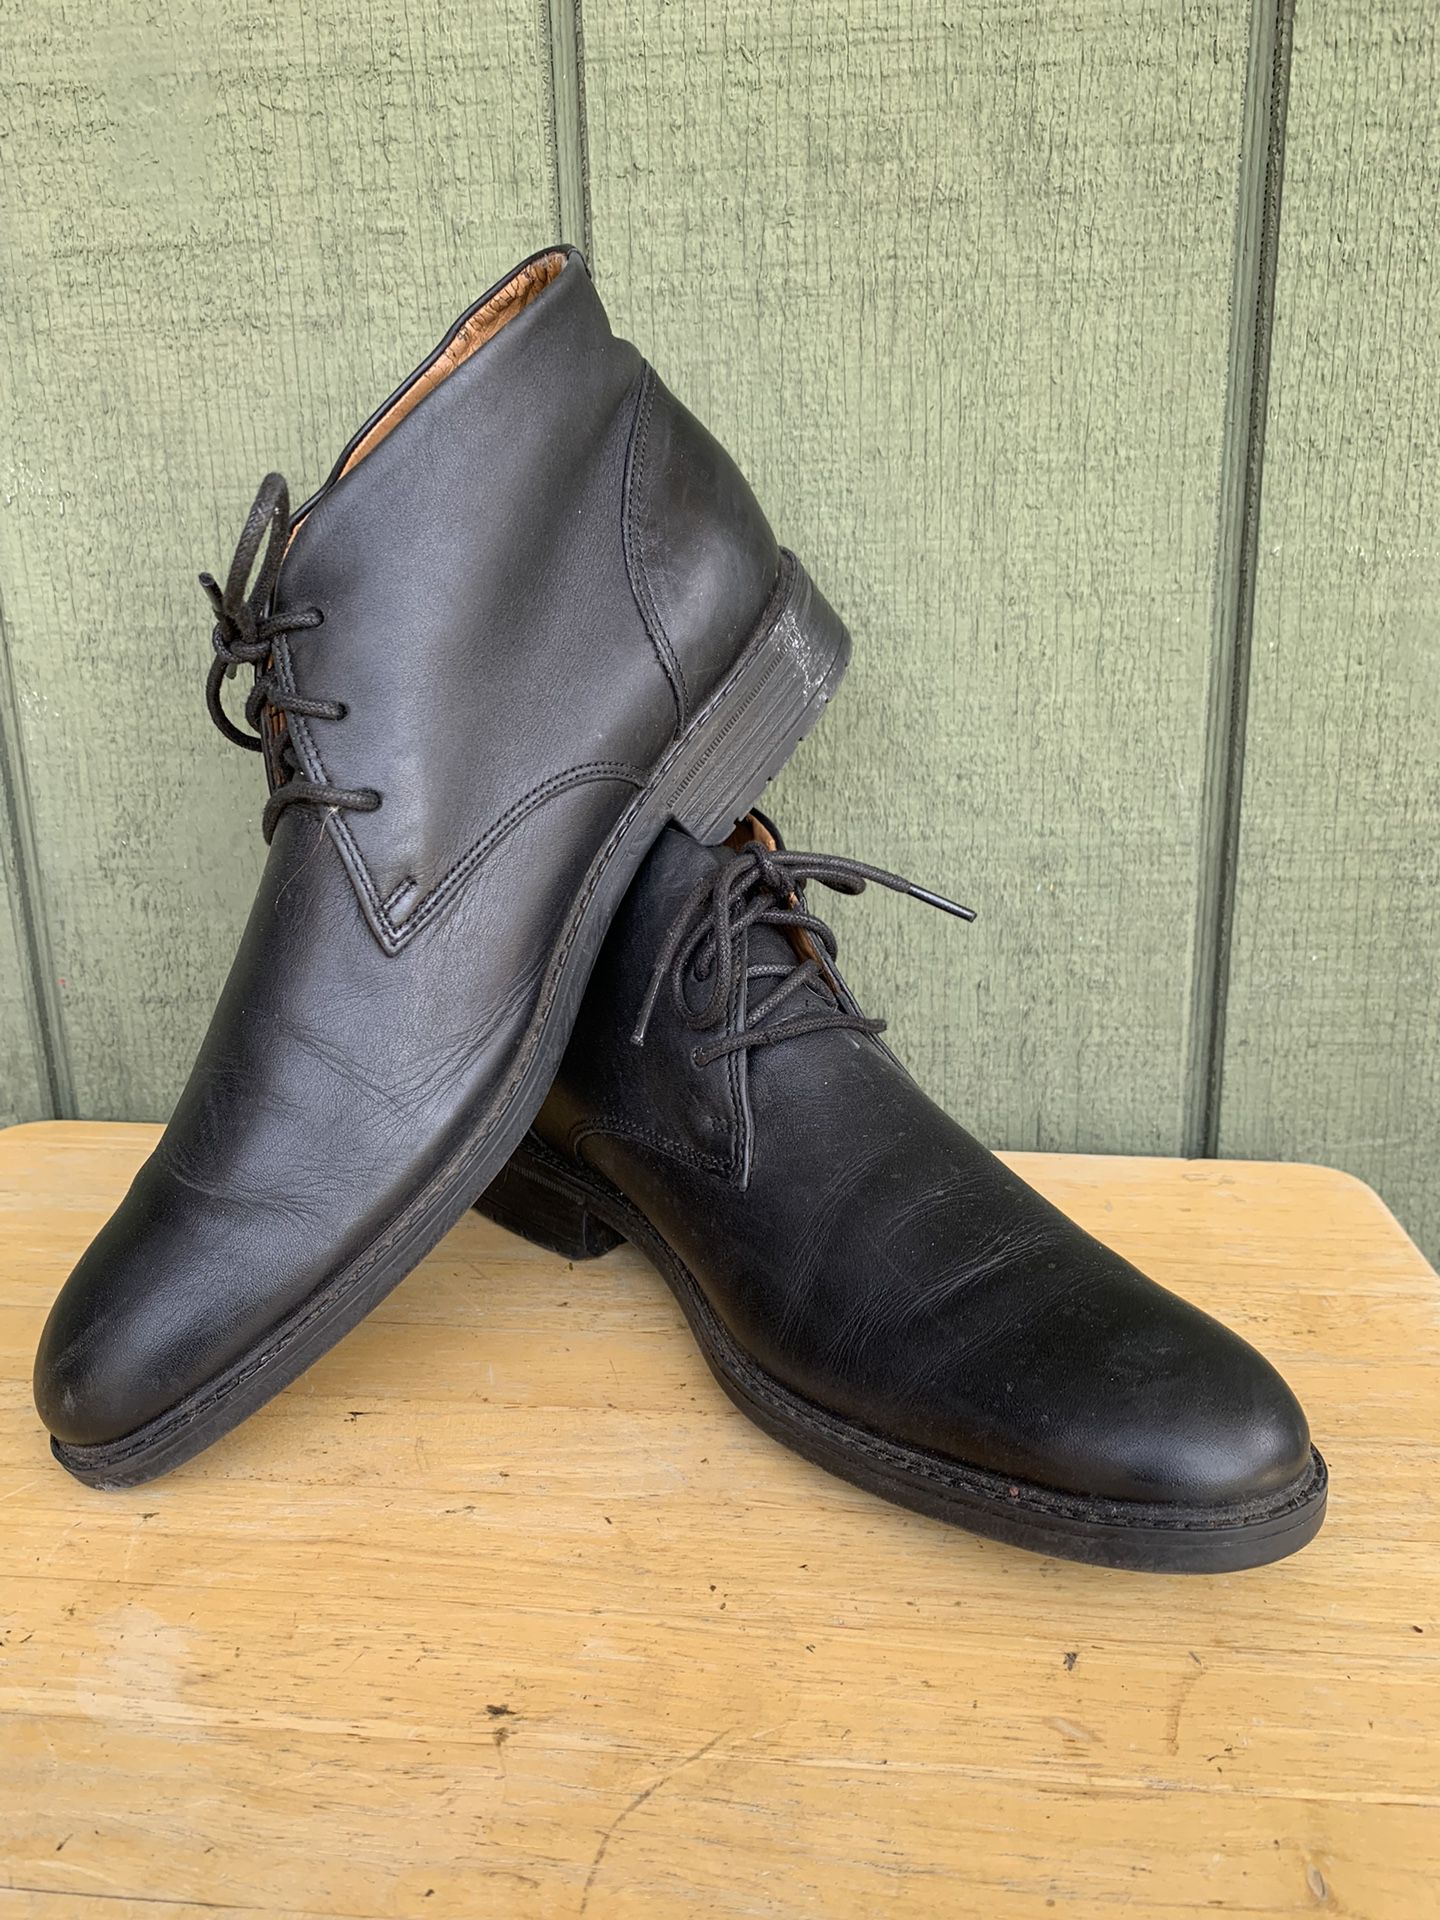 Recepción Desierto recuperación Clarks Chukka Boots Mens 9 M Cushion Plus Black Leather Ankle Shoes Booties  for Sale in West Covina, CA - OfferUp